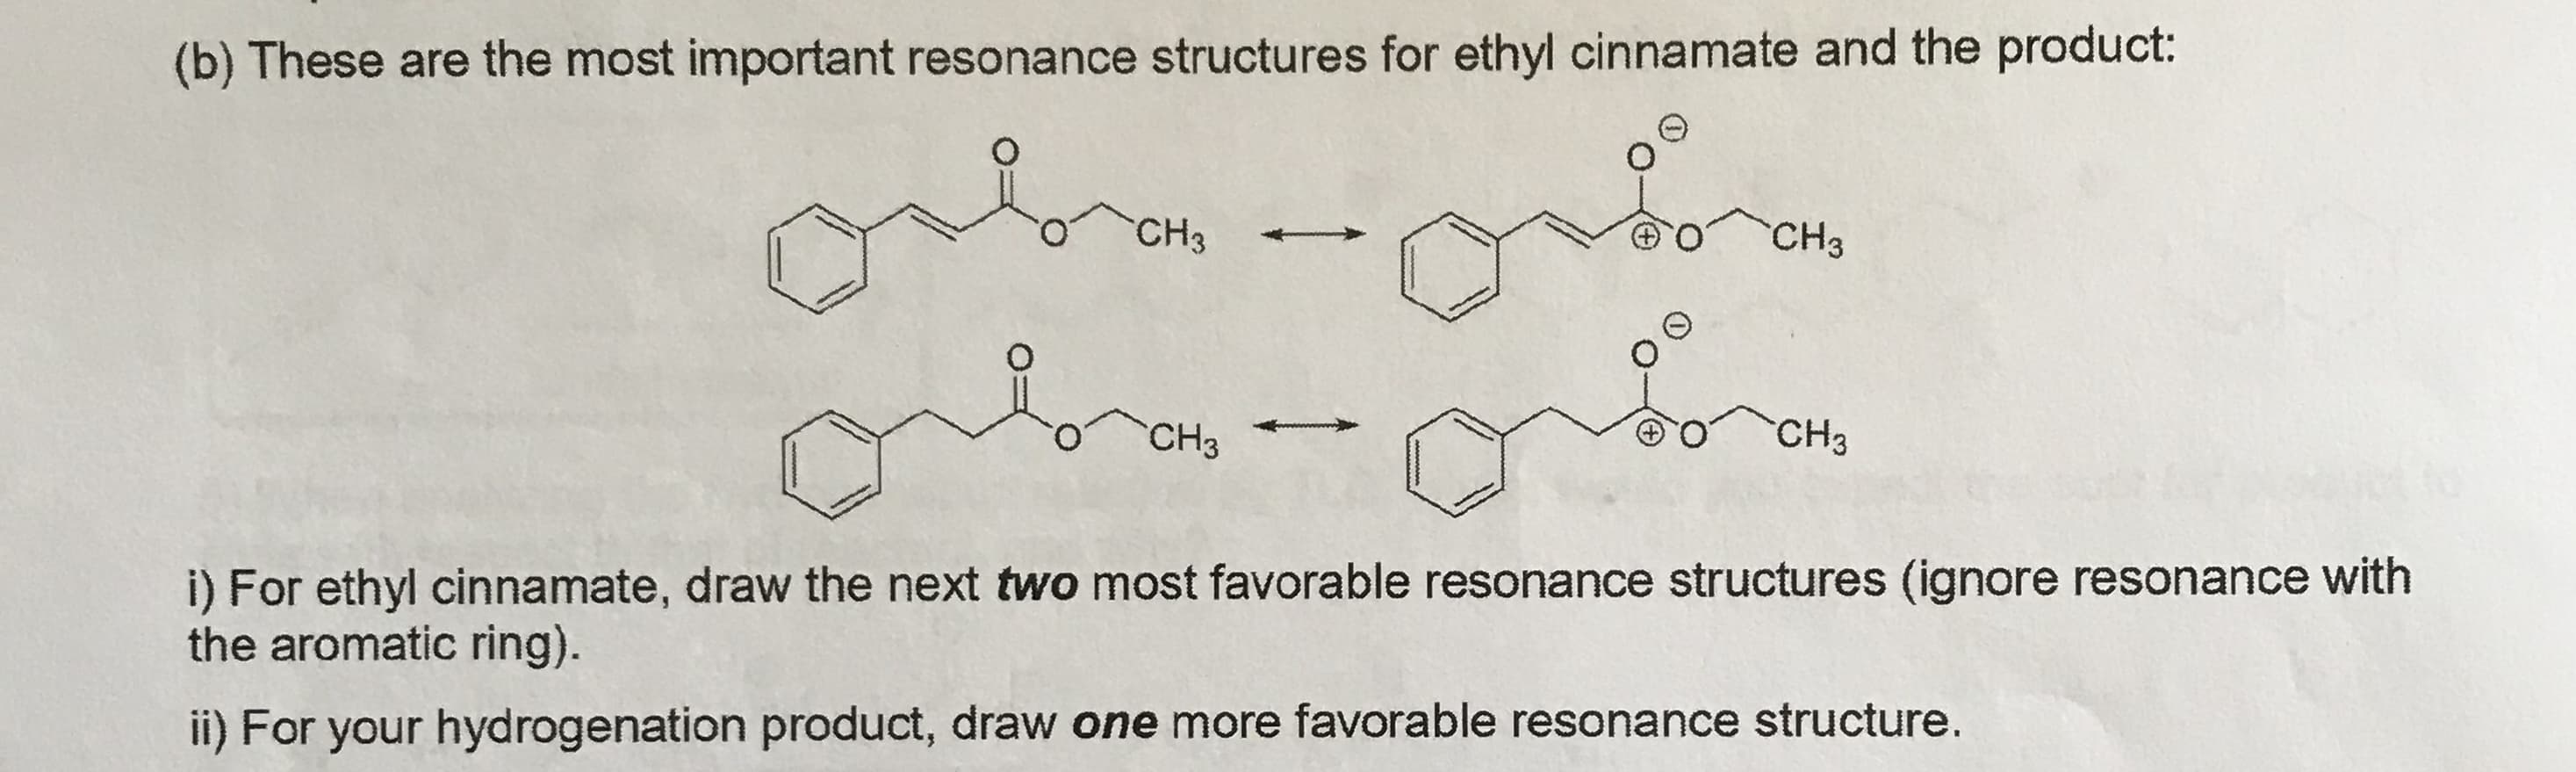 (b) These are the most important resonance structures for ethyl cinnamate and the product:
CH3
CH3
CHз
CHз
i) For ethyl cinnamate, draw the next two most favorable resonance structures (ignore resonance with
the aromatic ring).
ii) For your hydrogenation product, draw one more favorable resonance structure.
